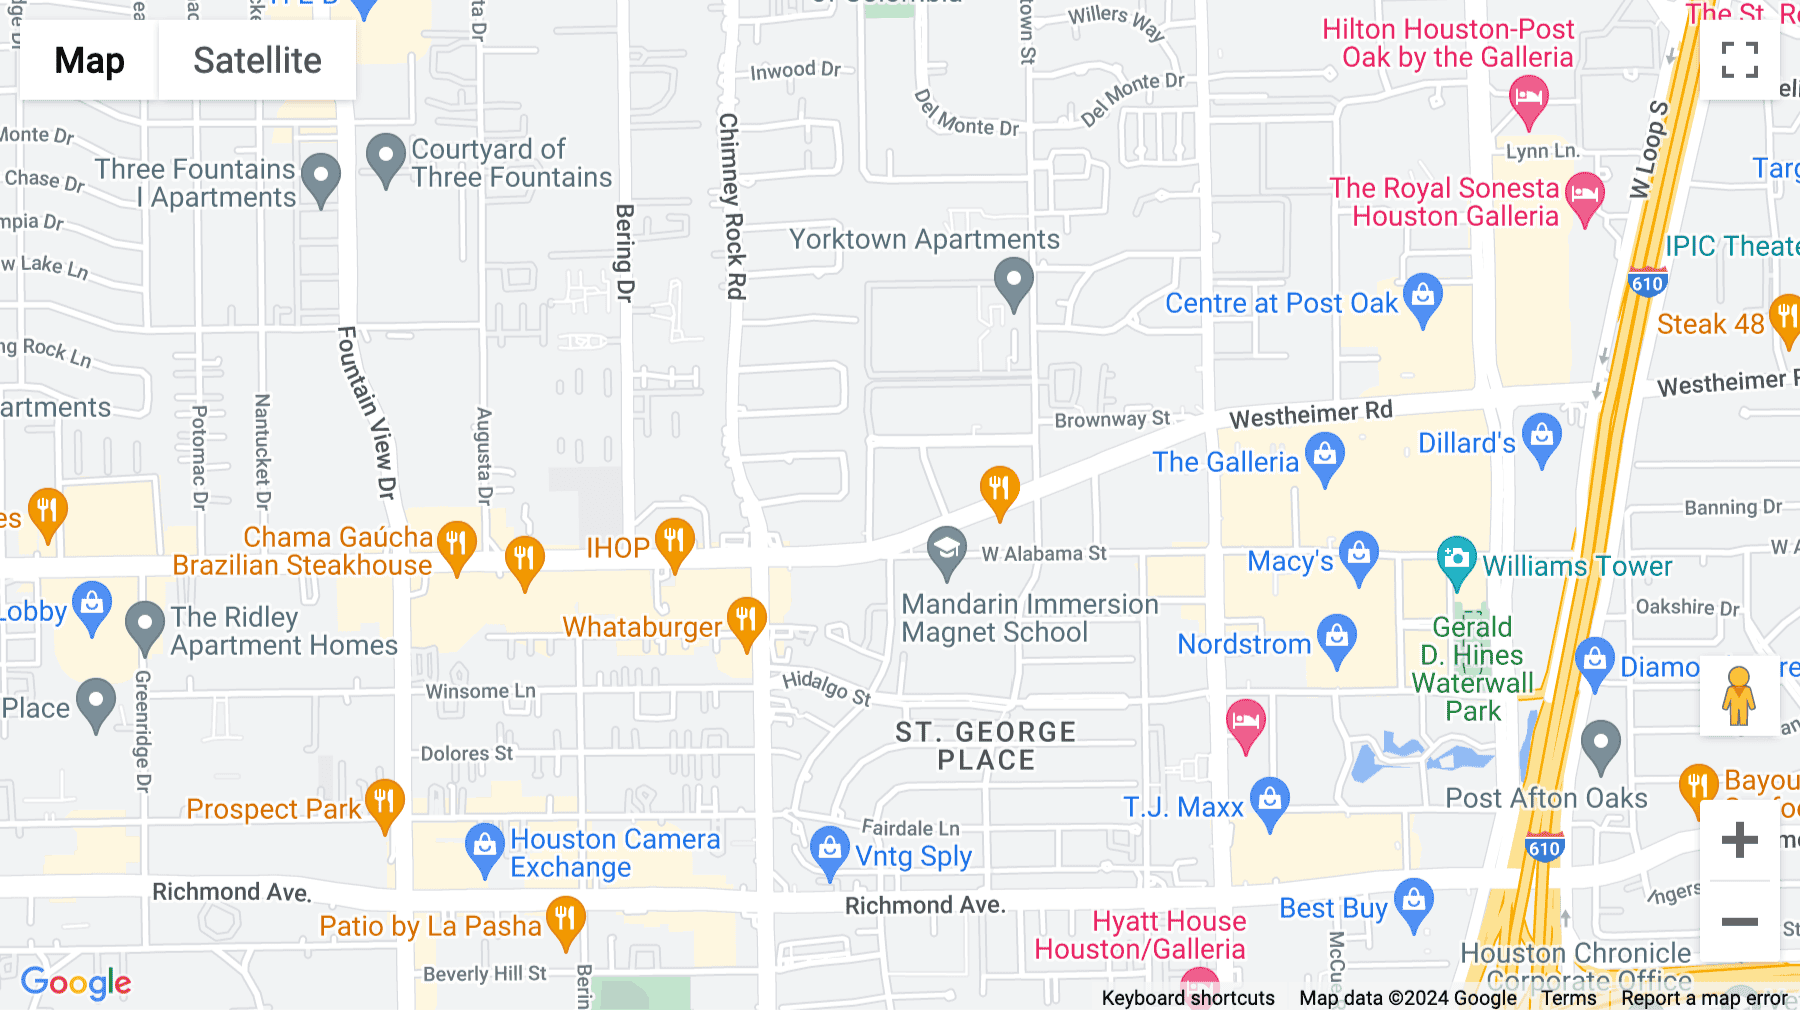 Click for interative map of 5444 Westheimer, Suite 1000, Westheimer Business Centre, Houston